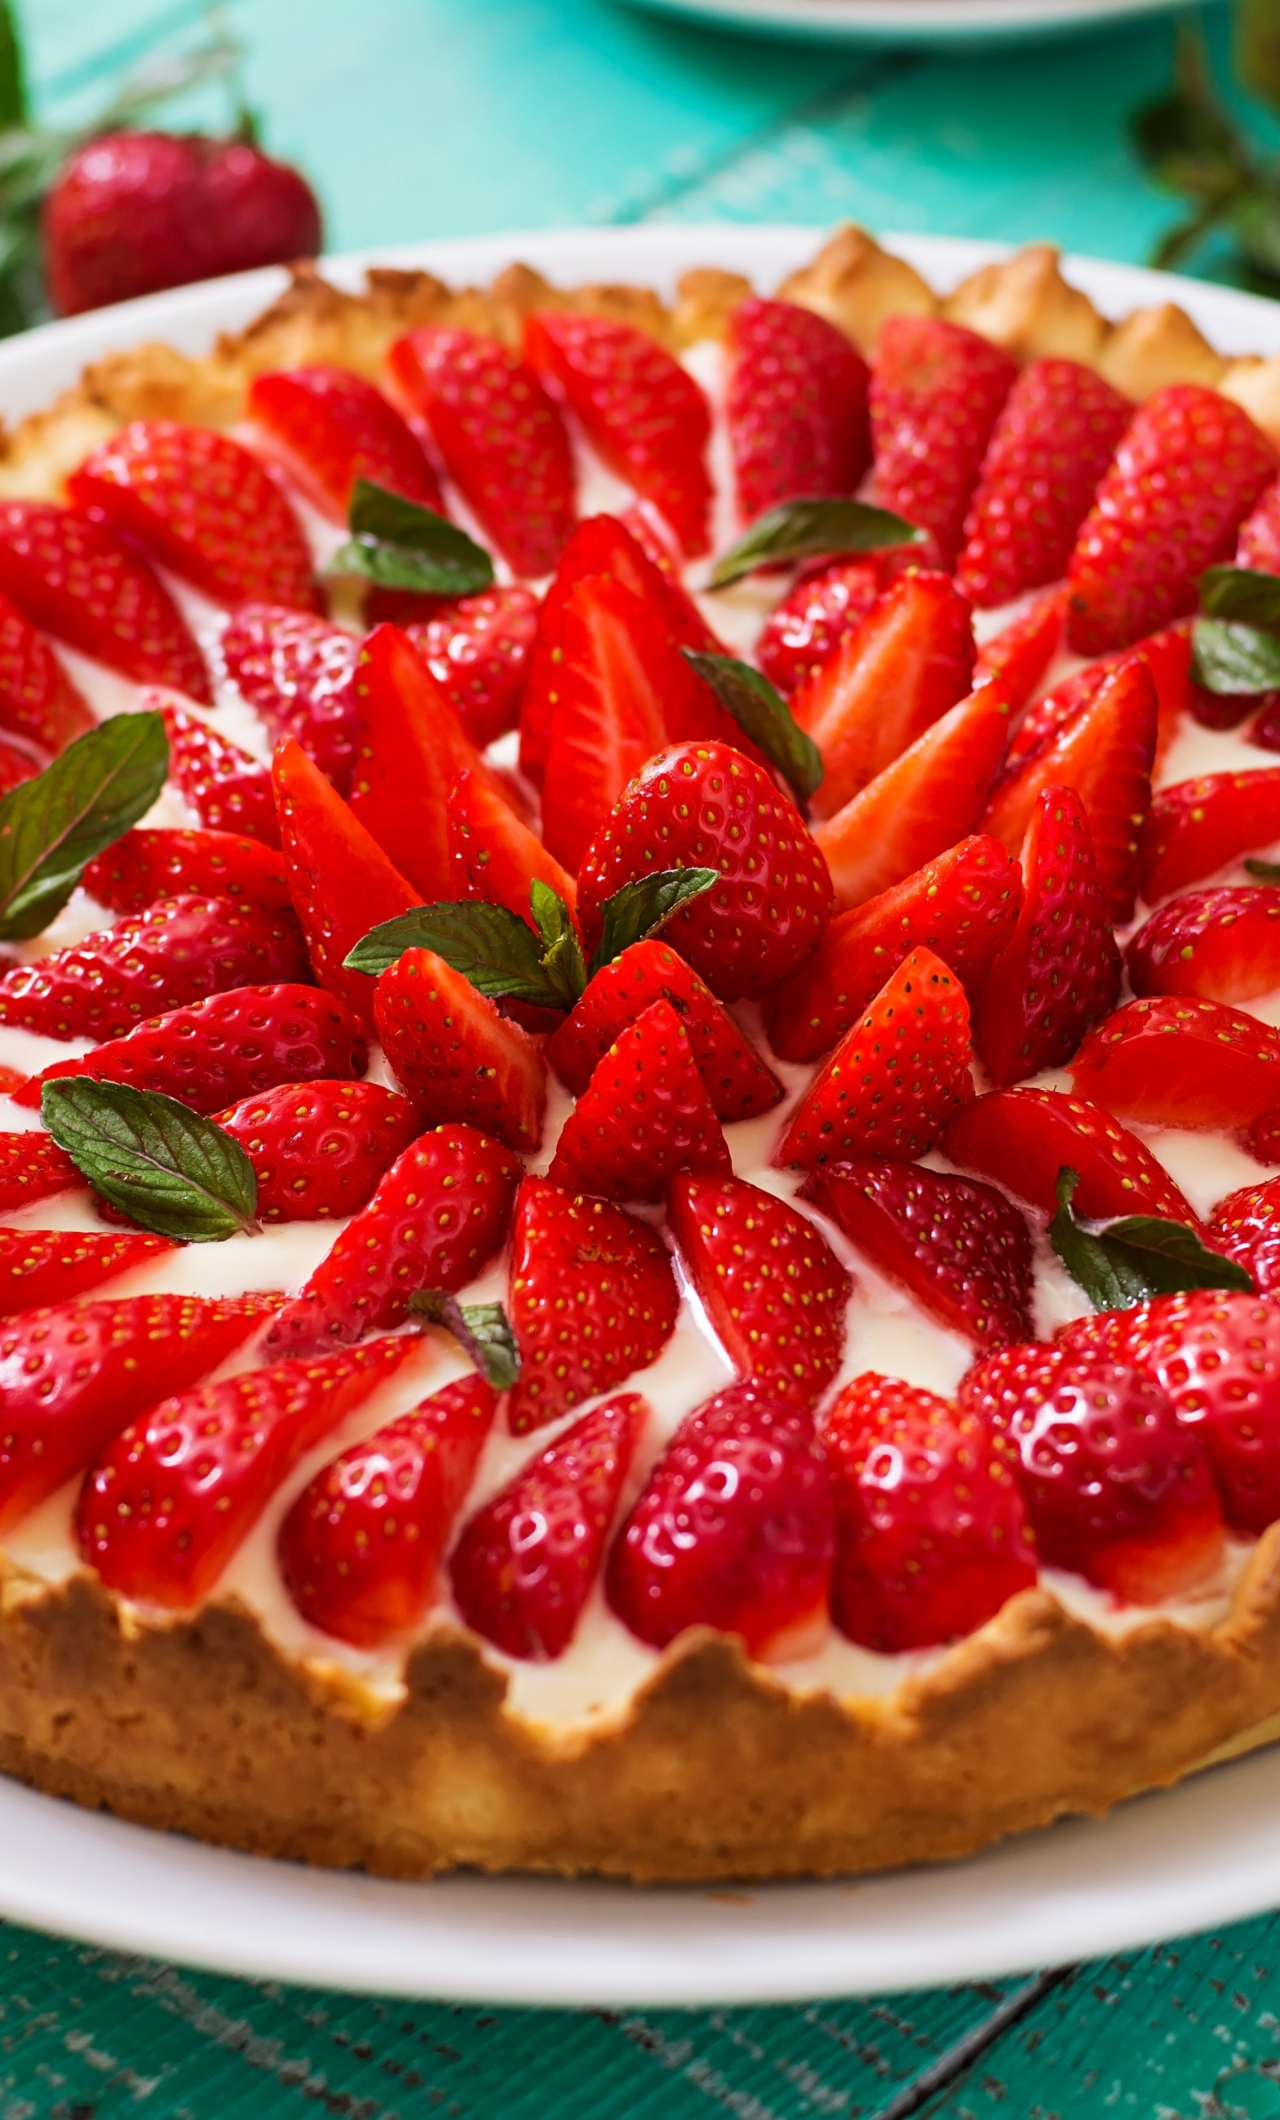 Download strawberry pie, cake, food 1280x2120 wallpaper, iphone 6 plus, 1280x2120 HD image, background, 1682